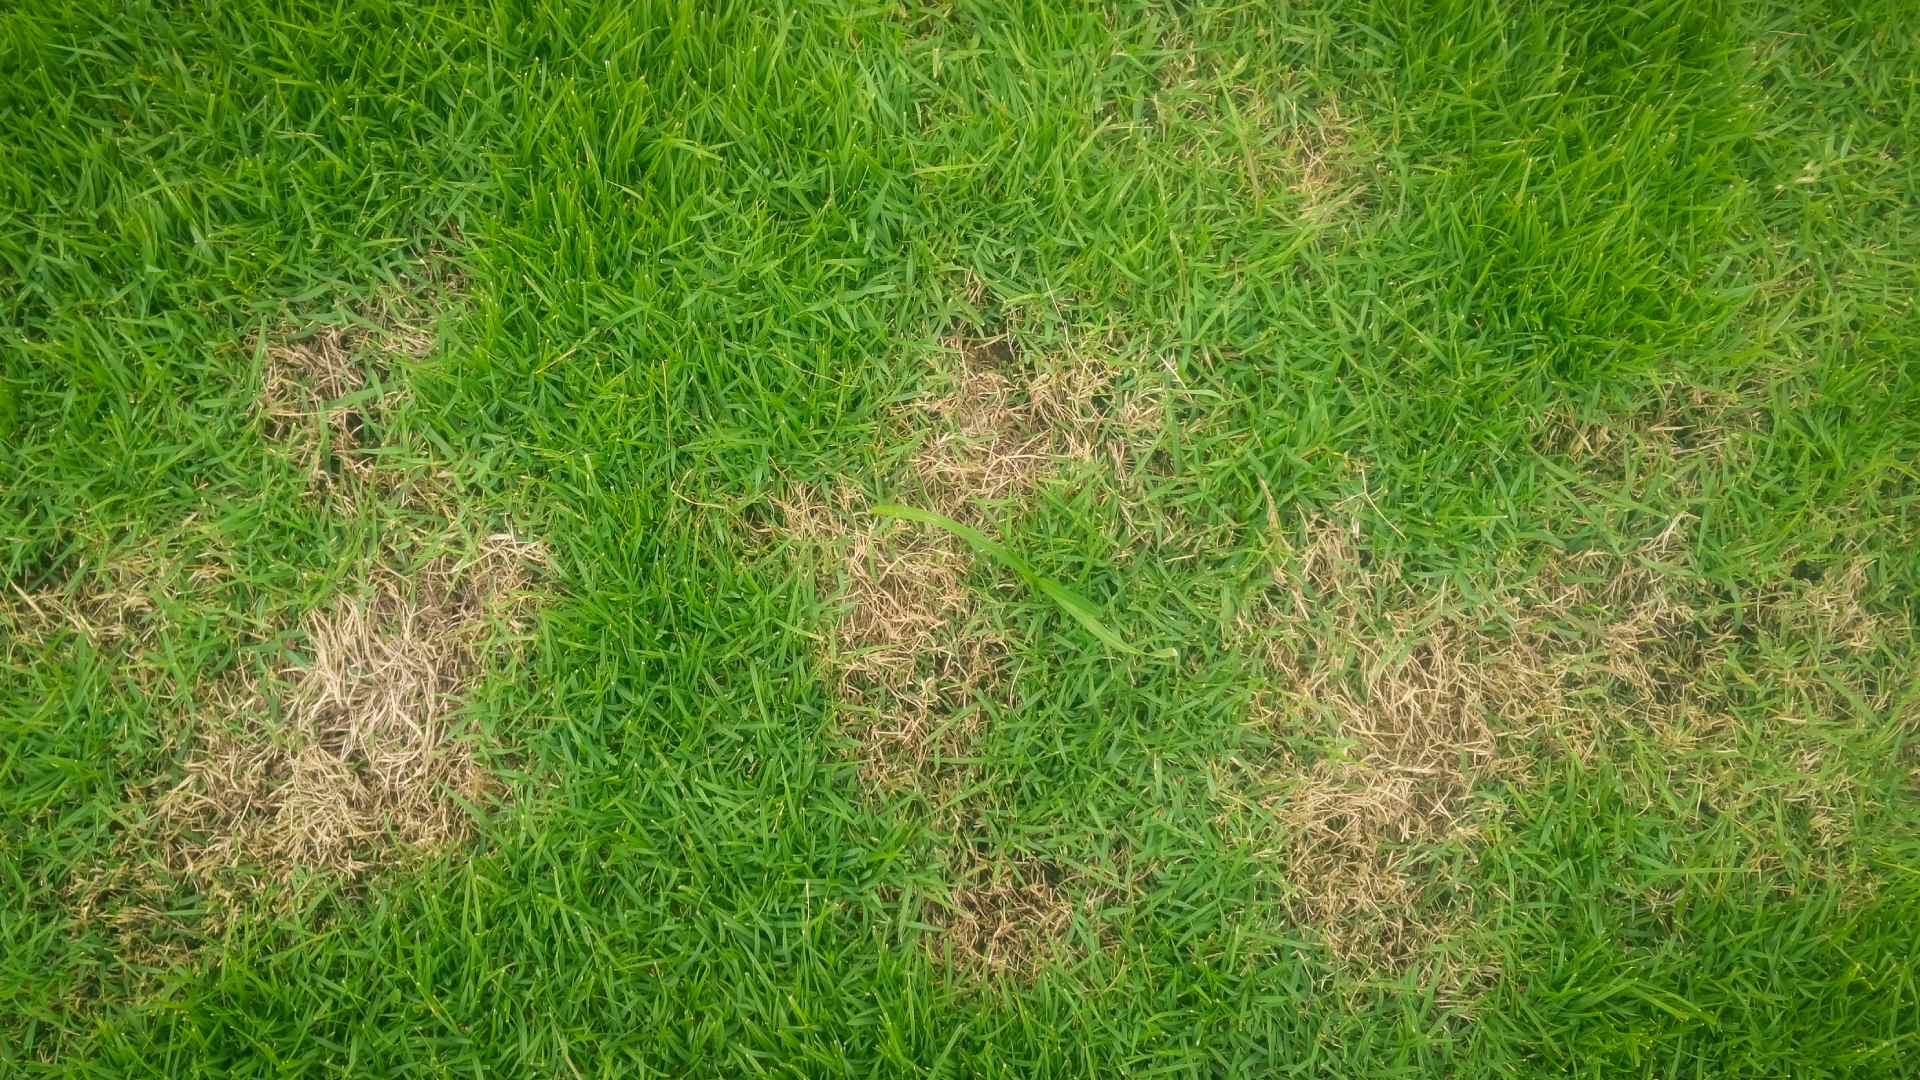 Lawn disease infected lawn in North Mankato, MN.